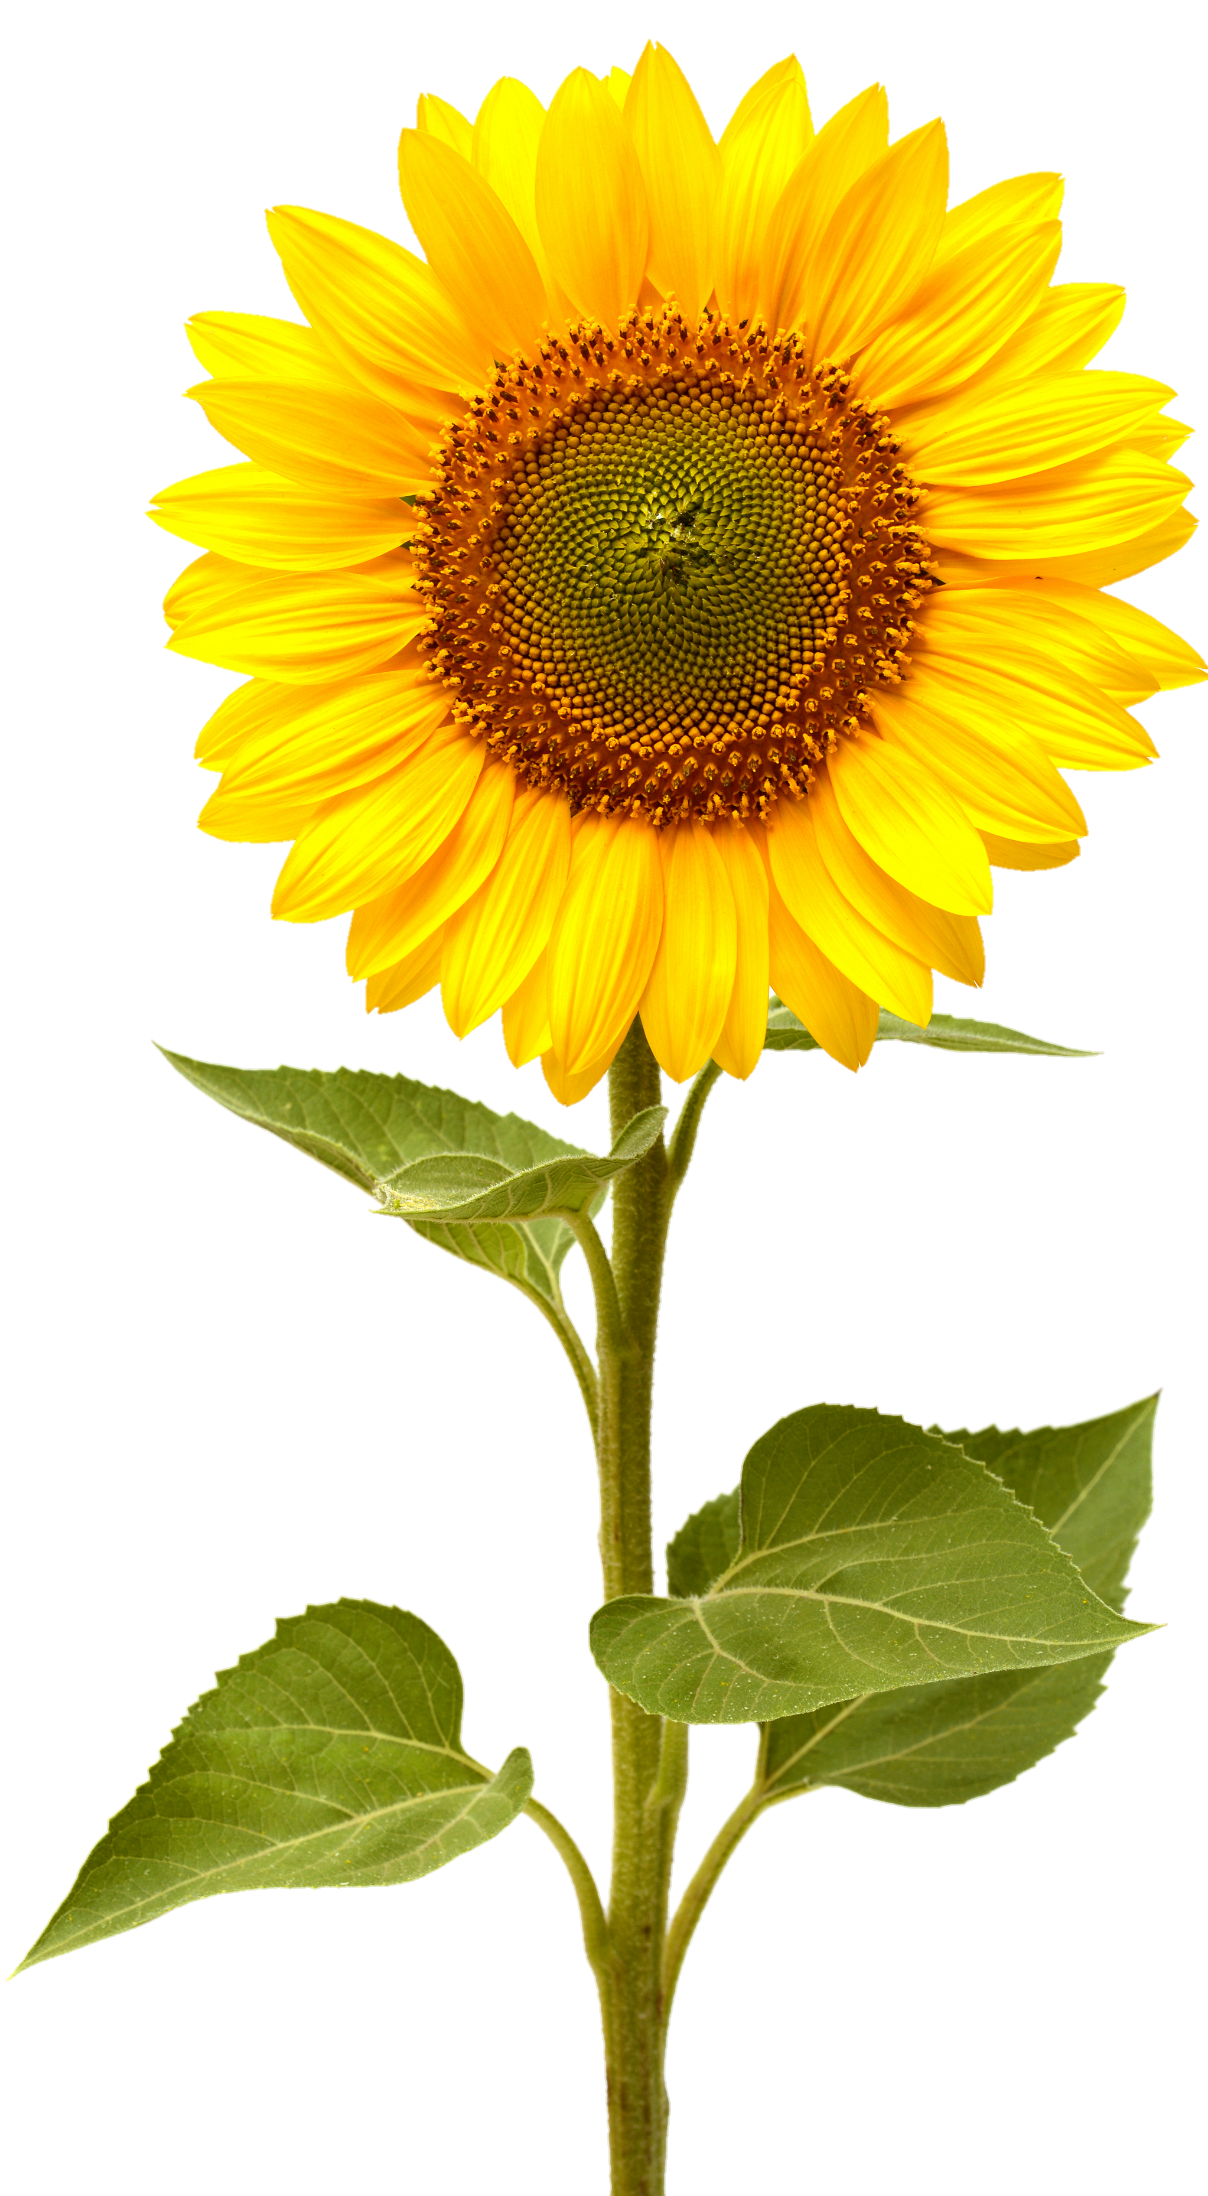 sunflower-png-image-from-pngfre-7-1